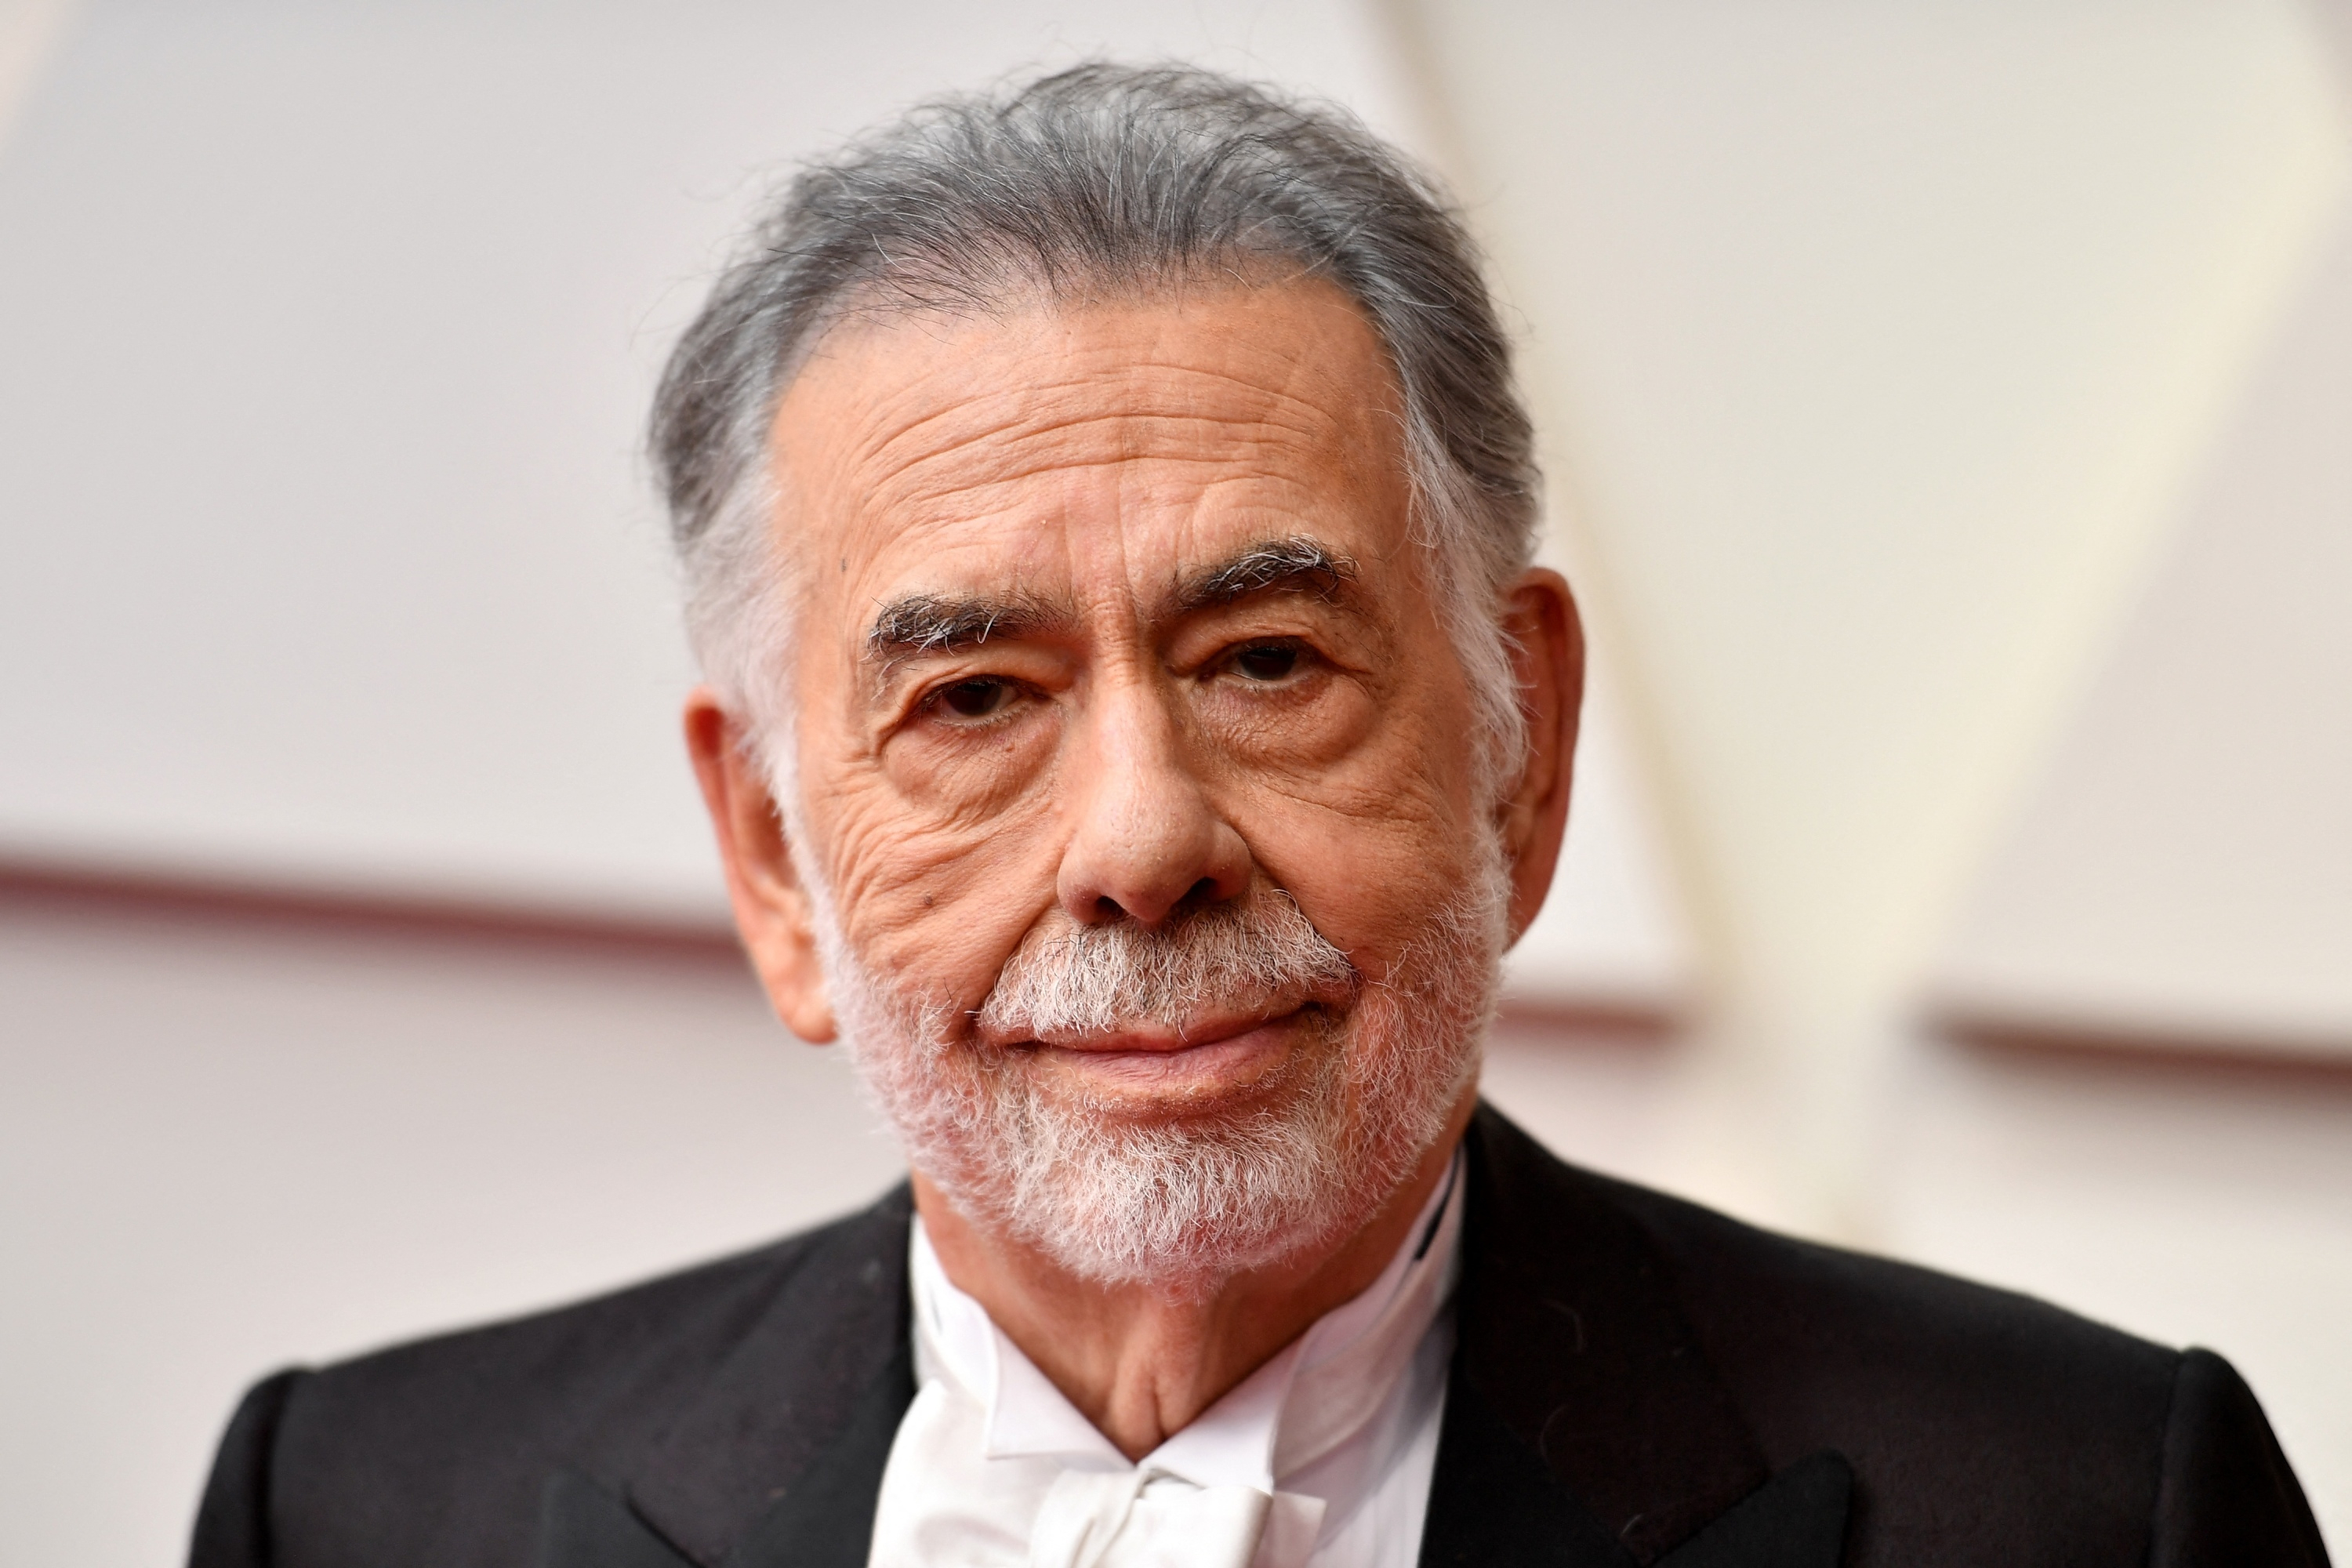 Cannes Film Festival: Francis Ford Coppola will be in competition with his film Megalopolis